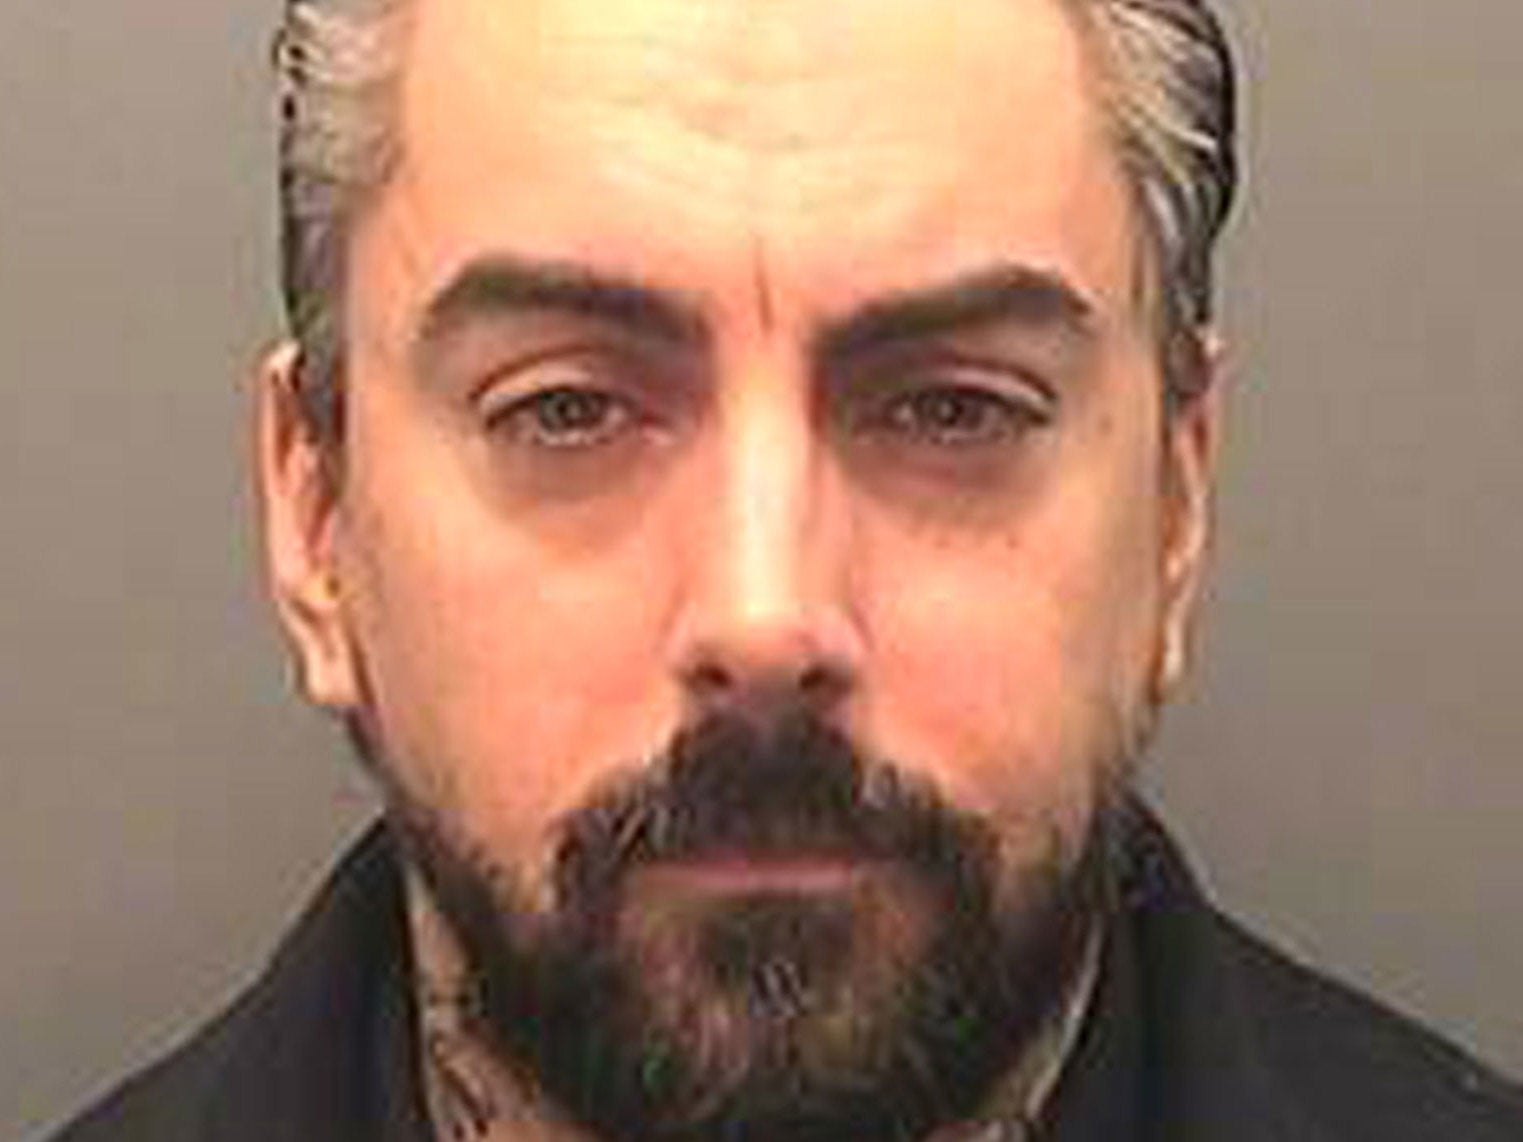 Ian Watkins wants to appeal the length of his sentence